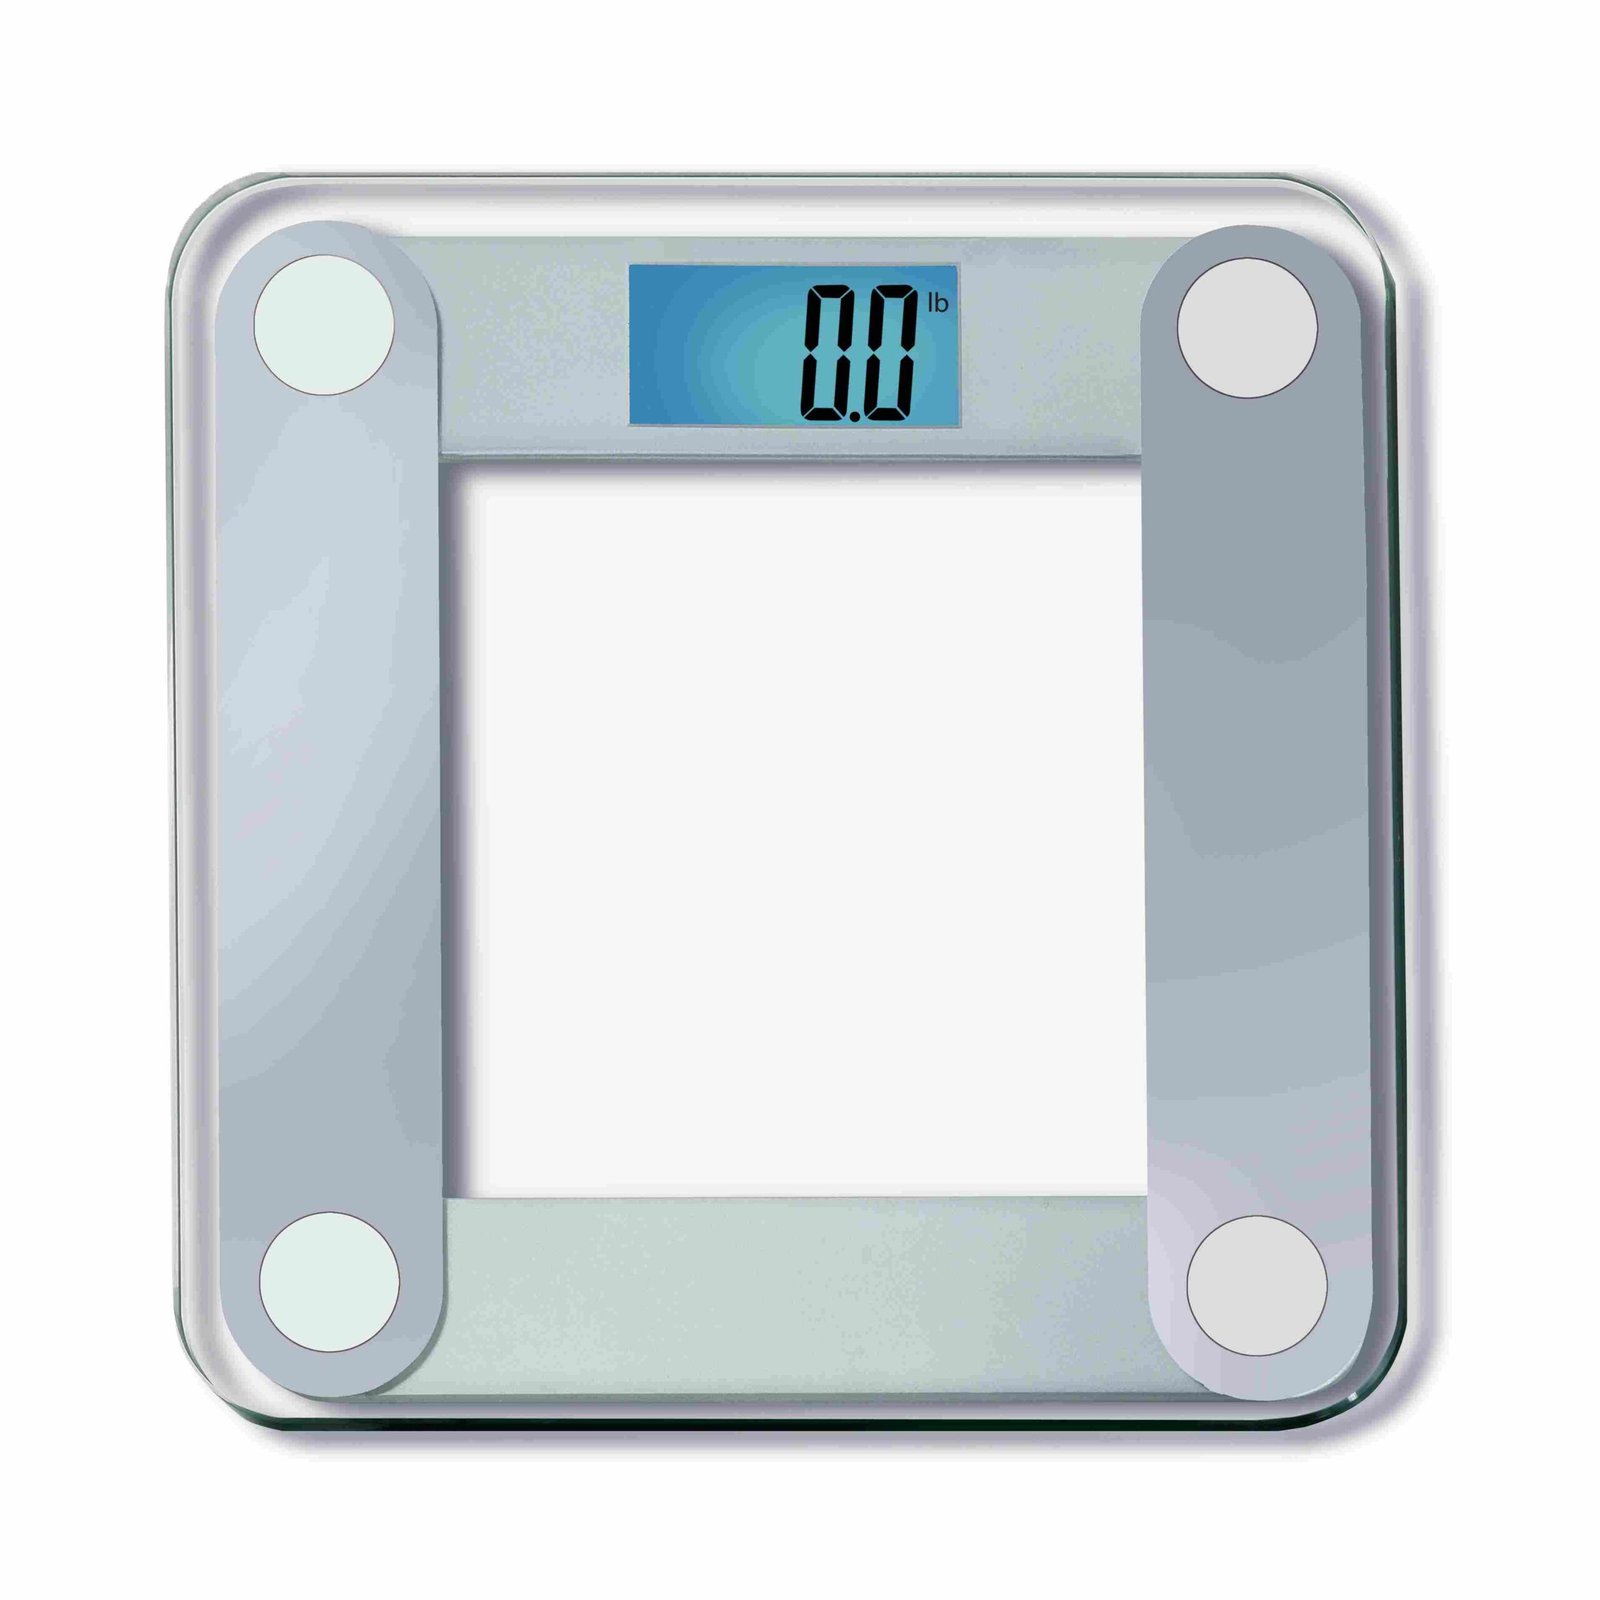 Advanced Digital Scale Solutions for Weight Control